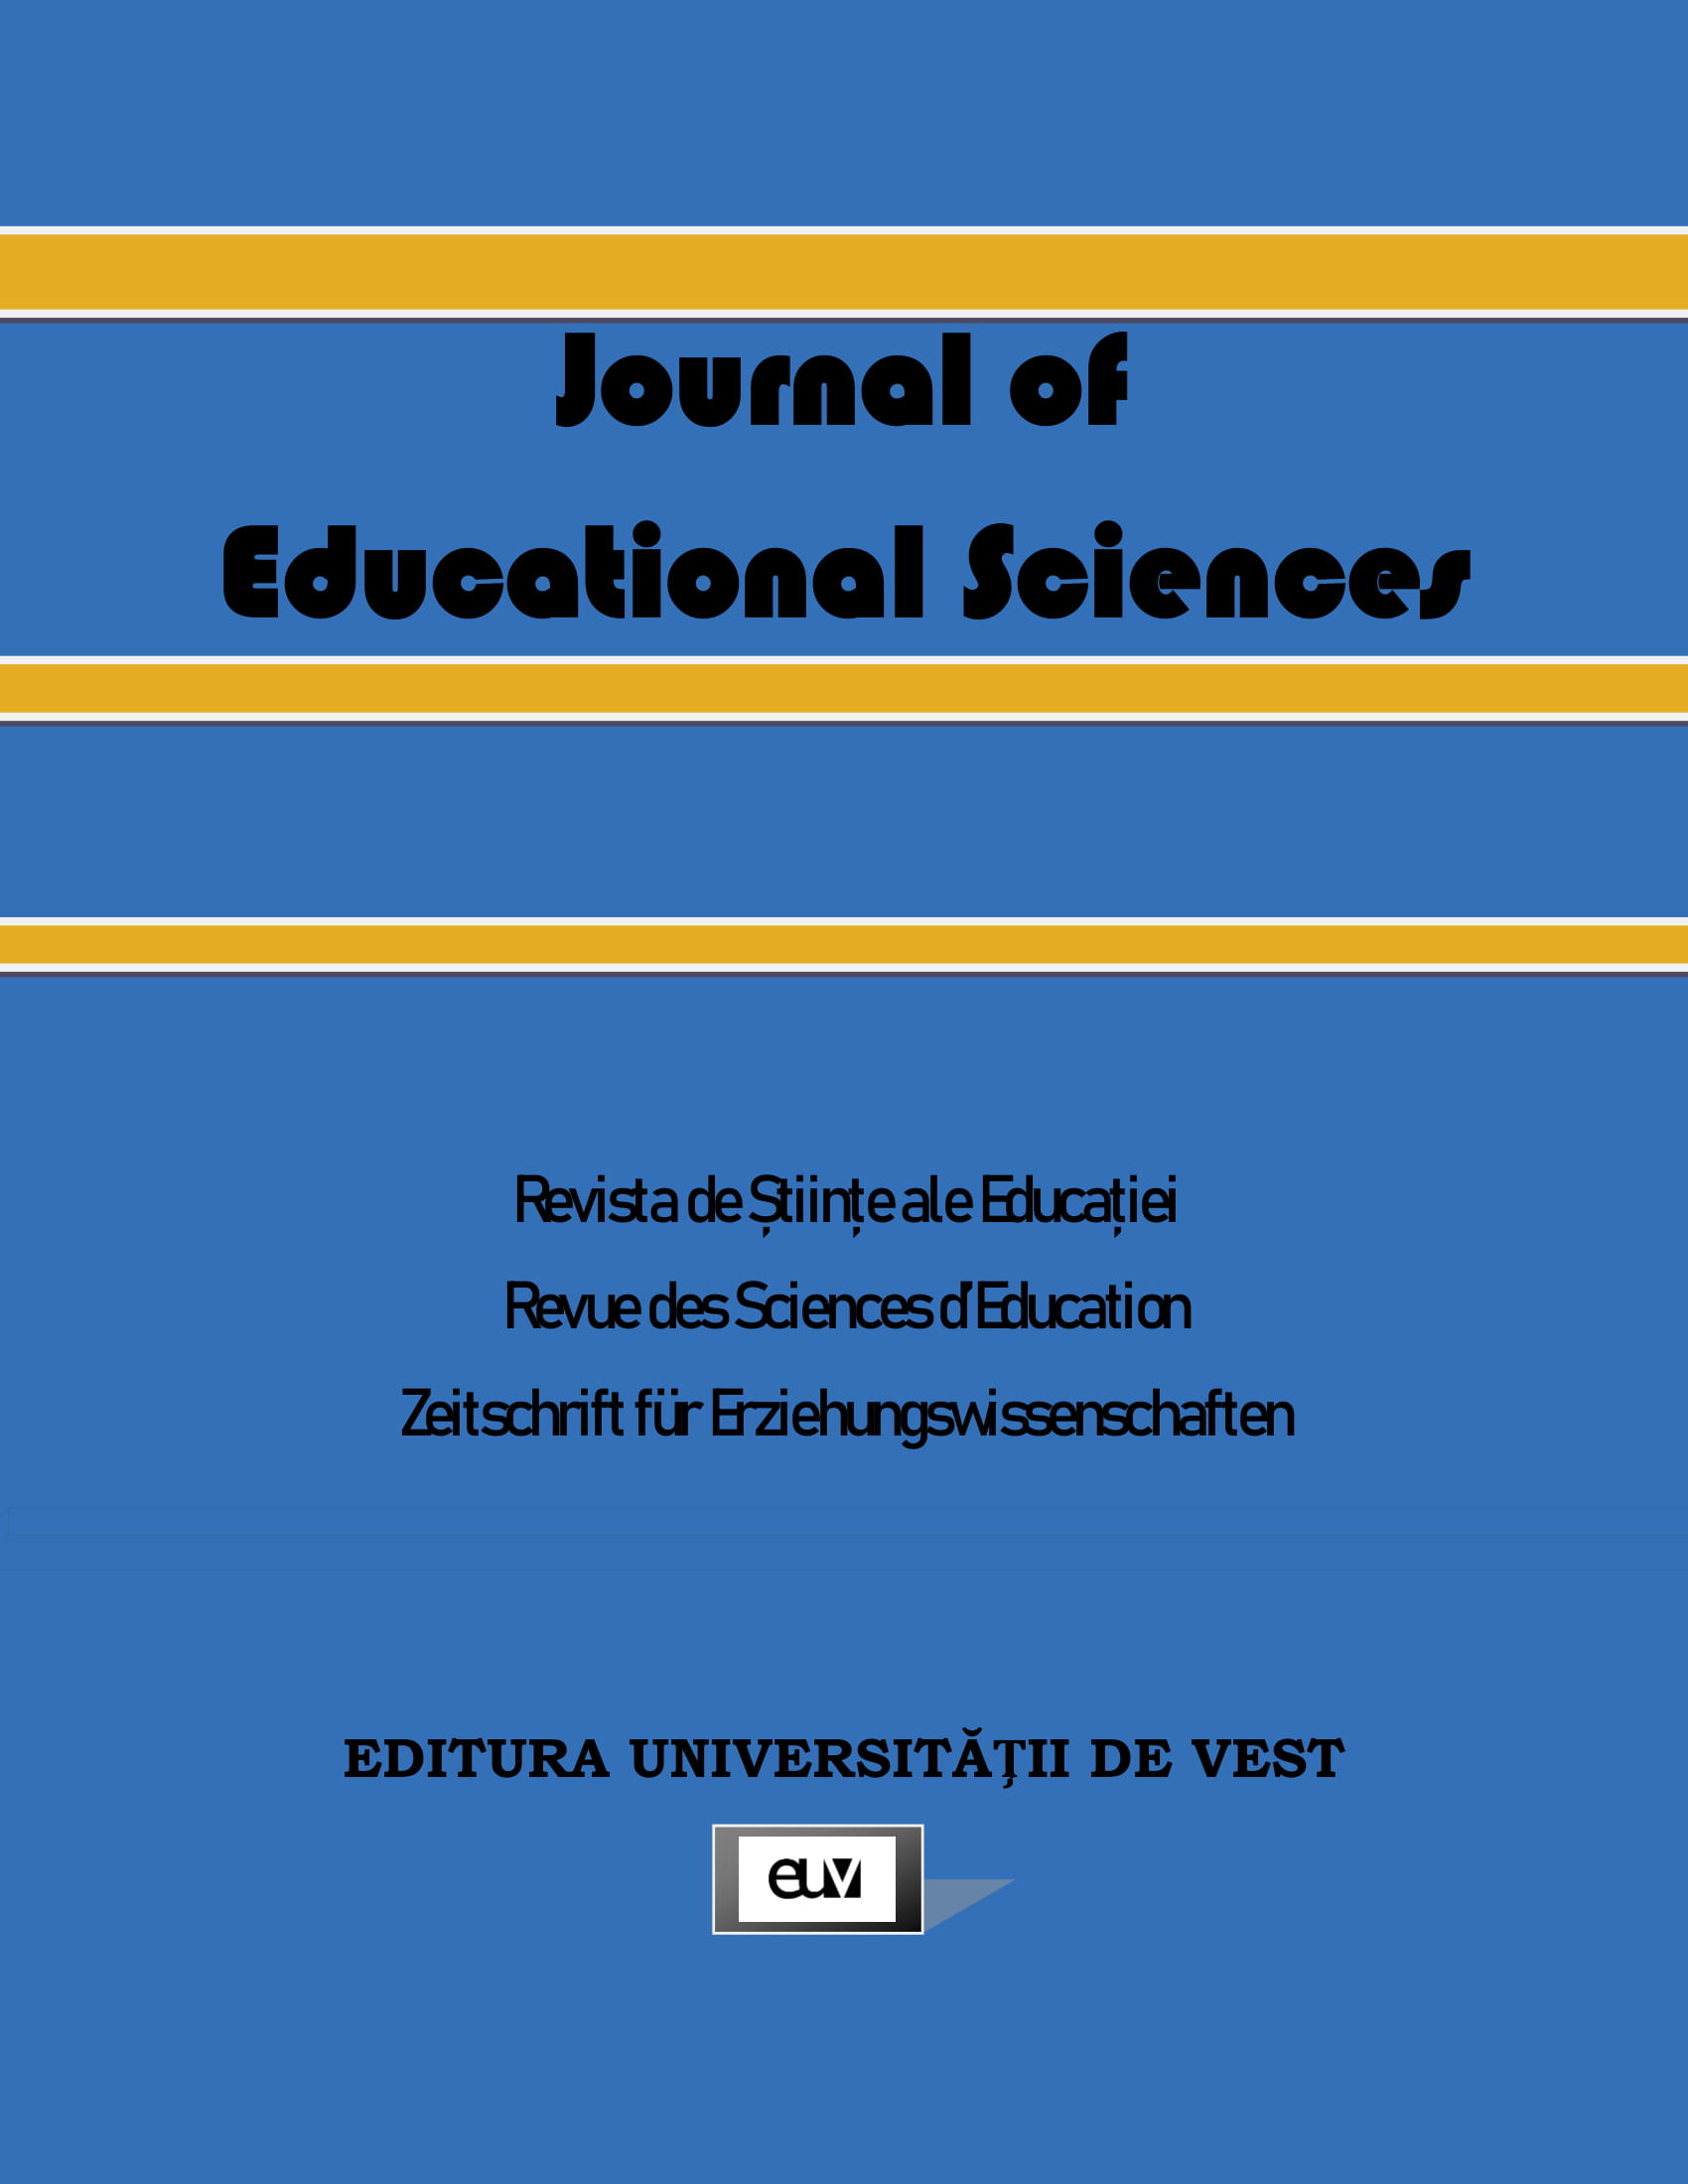 The Role of the Zakarpattia Institute of Postgraduate Pedagogical Education in Adult Education During Martial Law: A Case Study from Ukraine